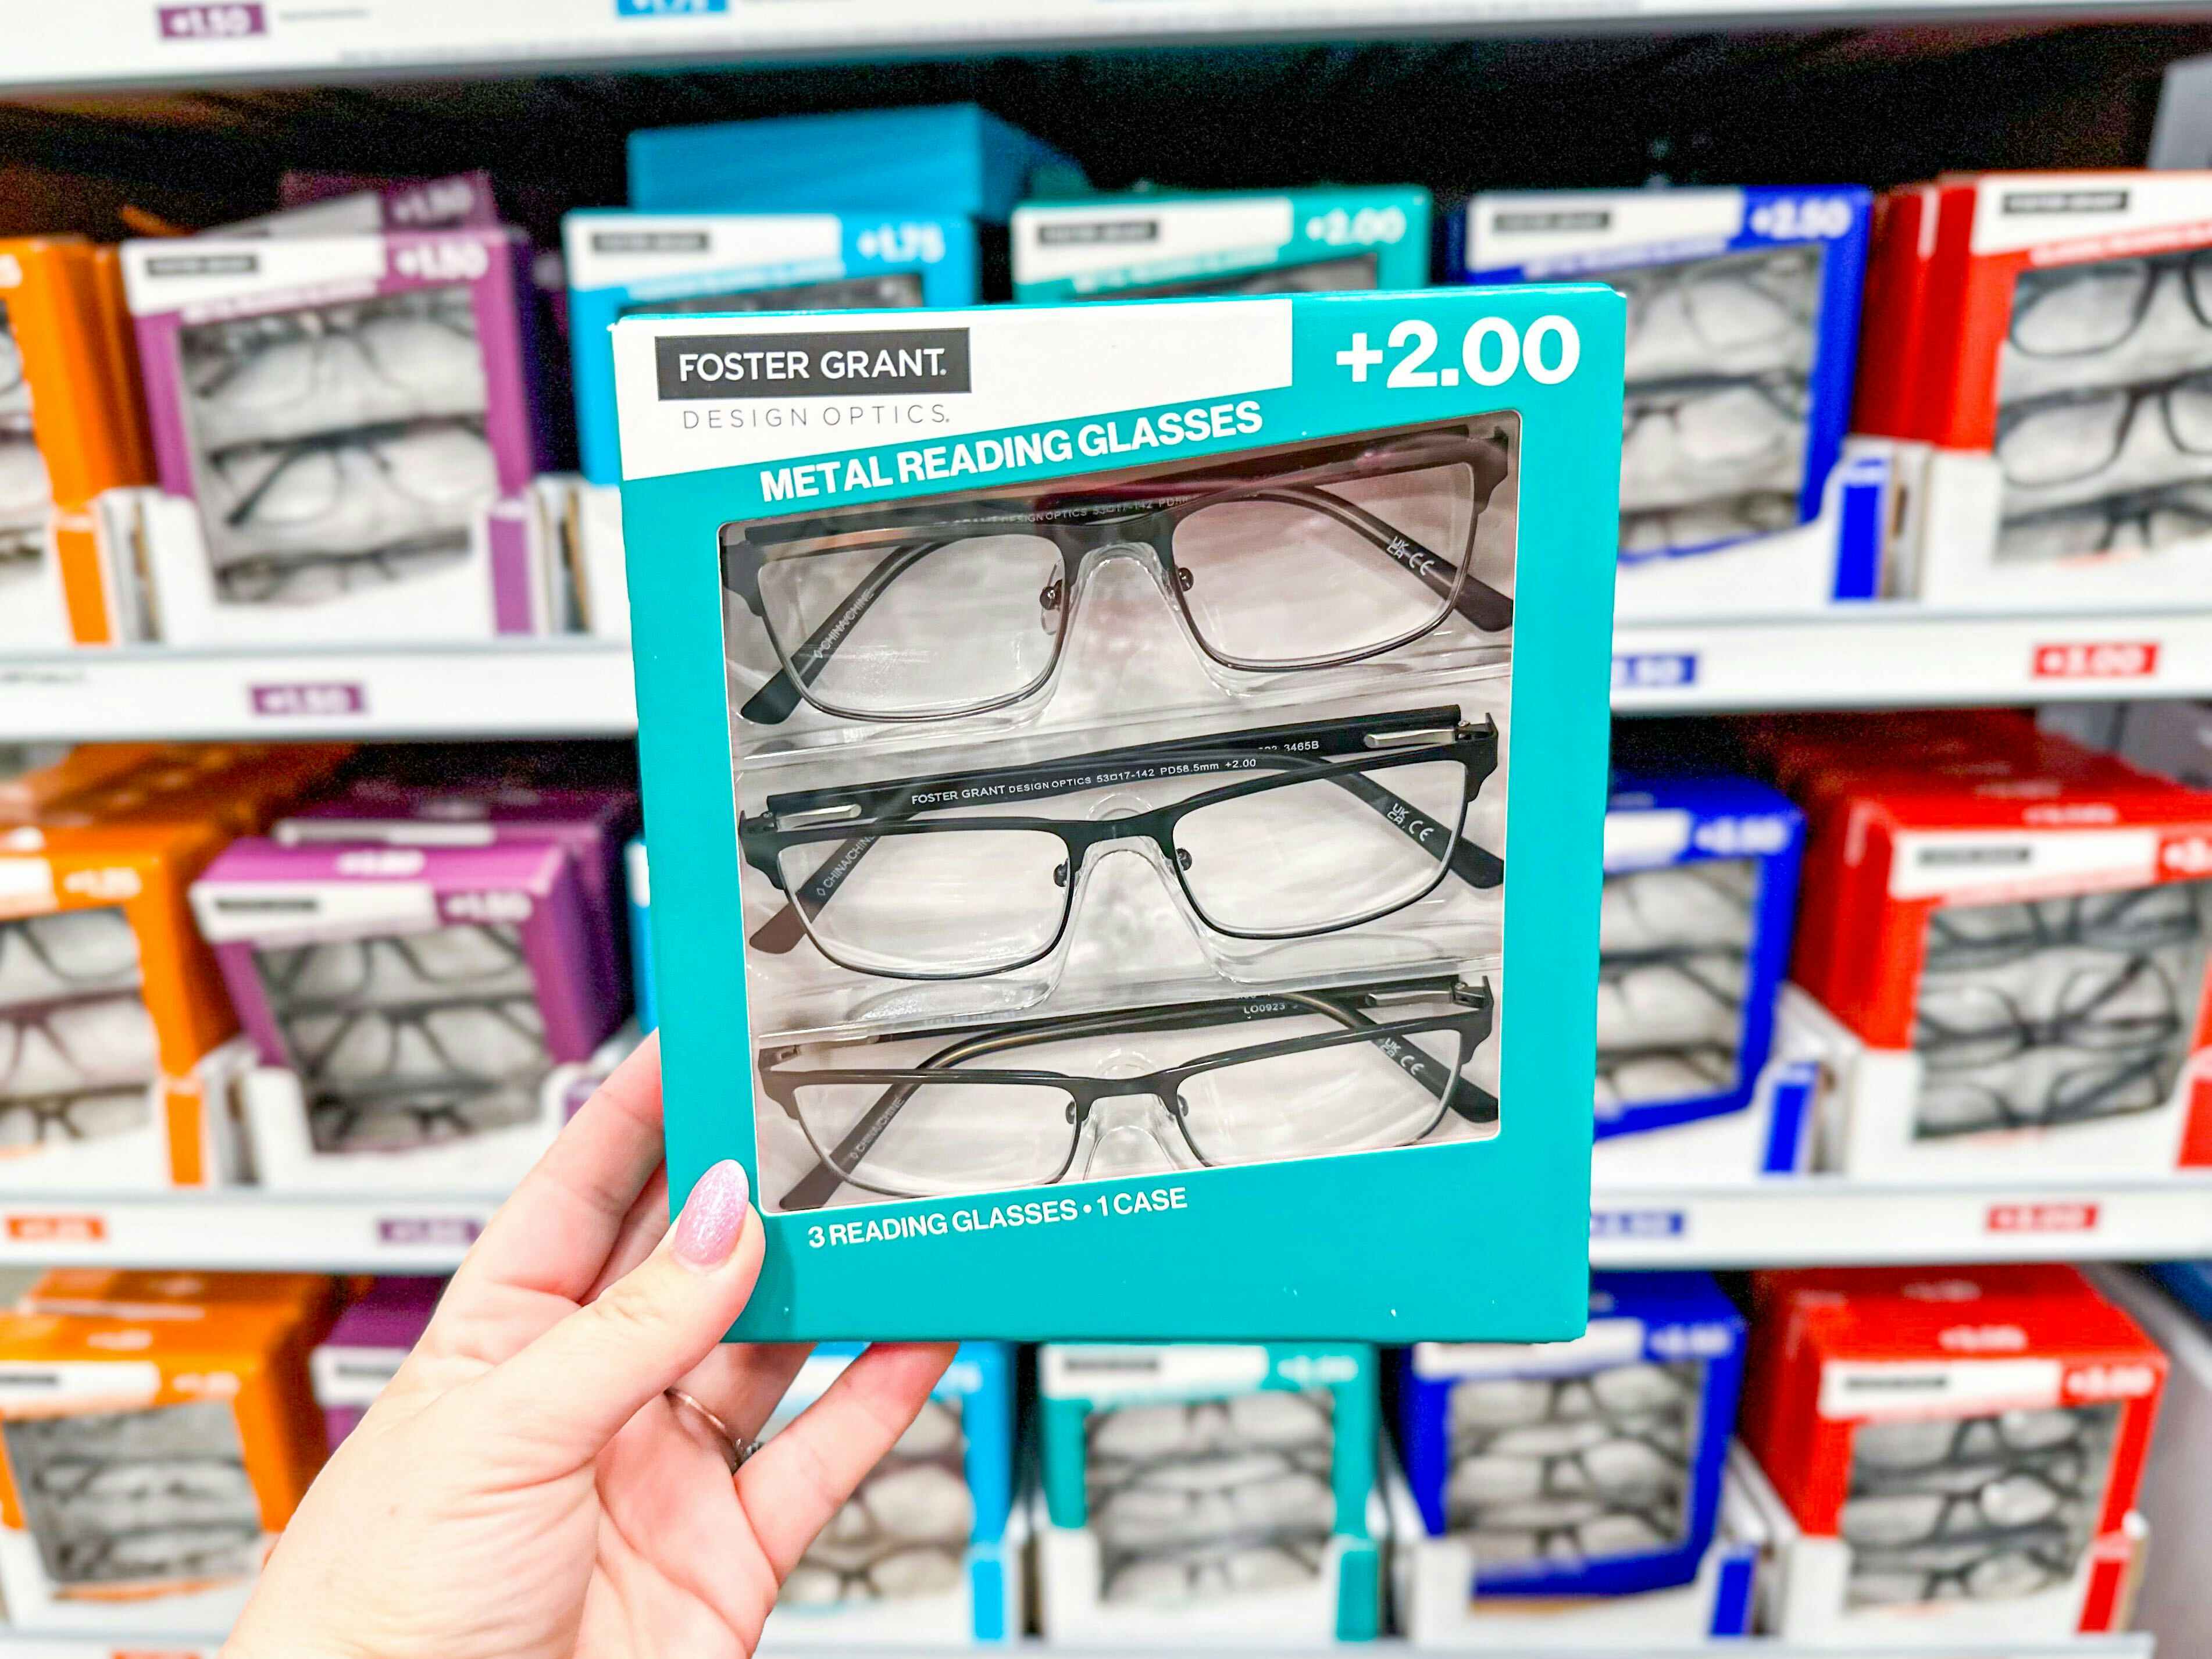 costco-wholesale-prices-going-down-reading-glasses-kcl-1